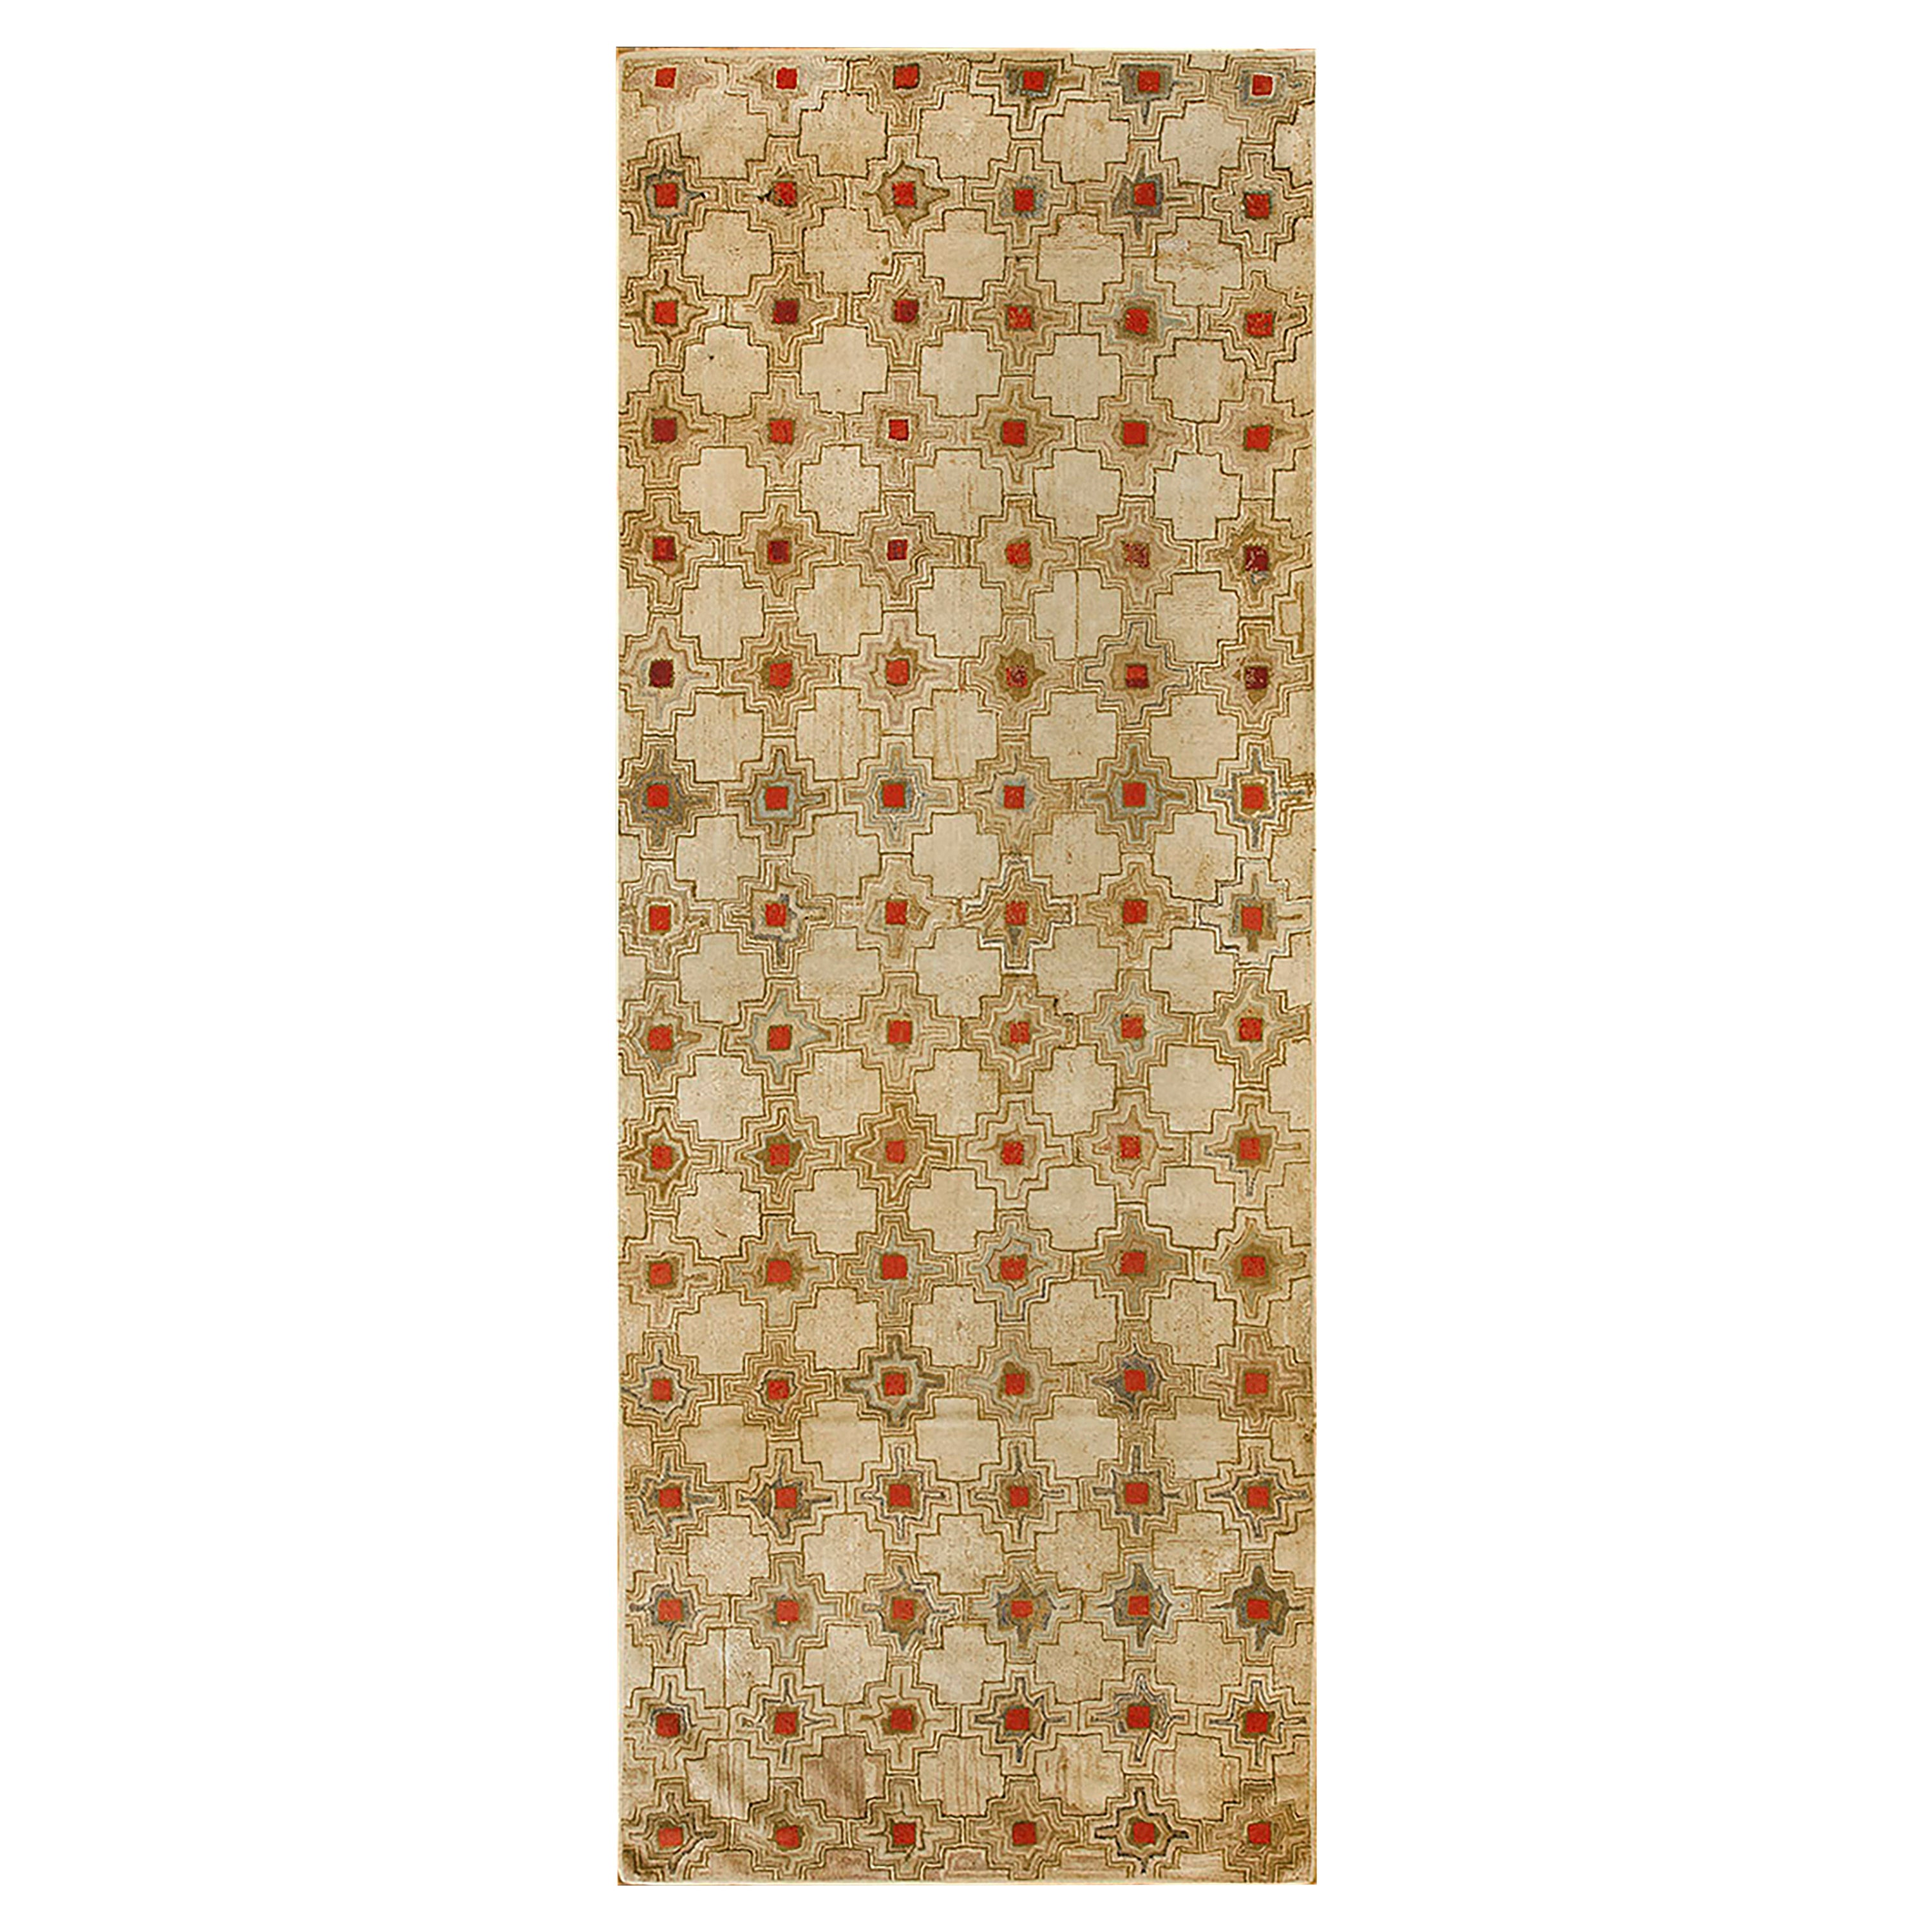 Antique American Hooked Rug  (4' x 10' 10" - 122 x 330 cm)